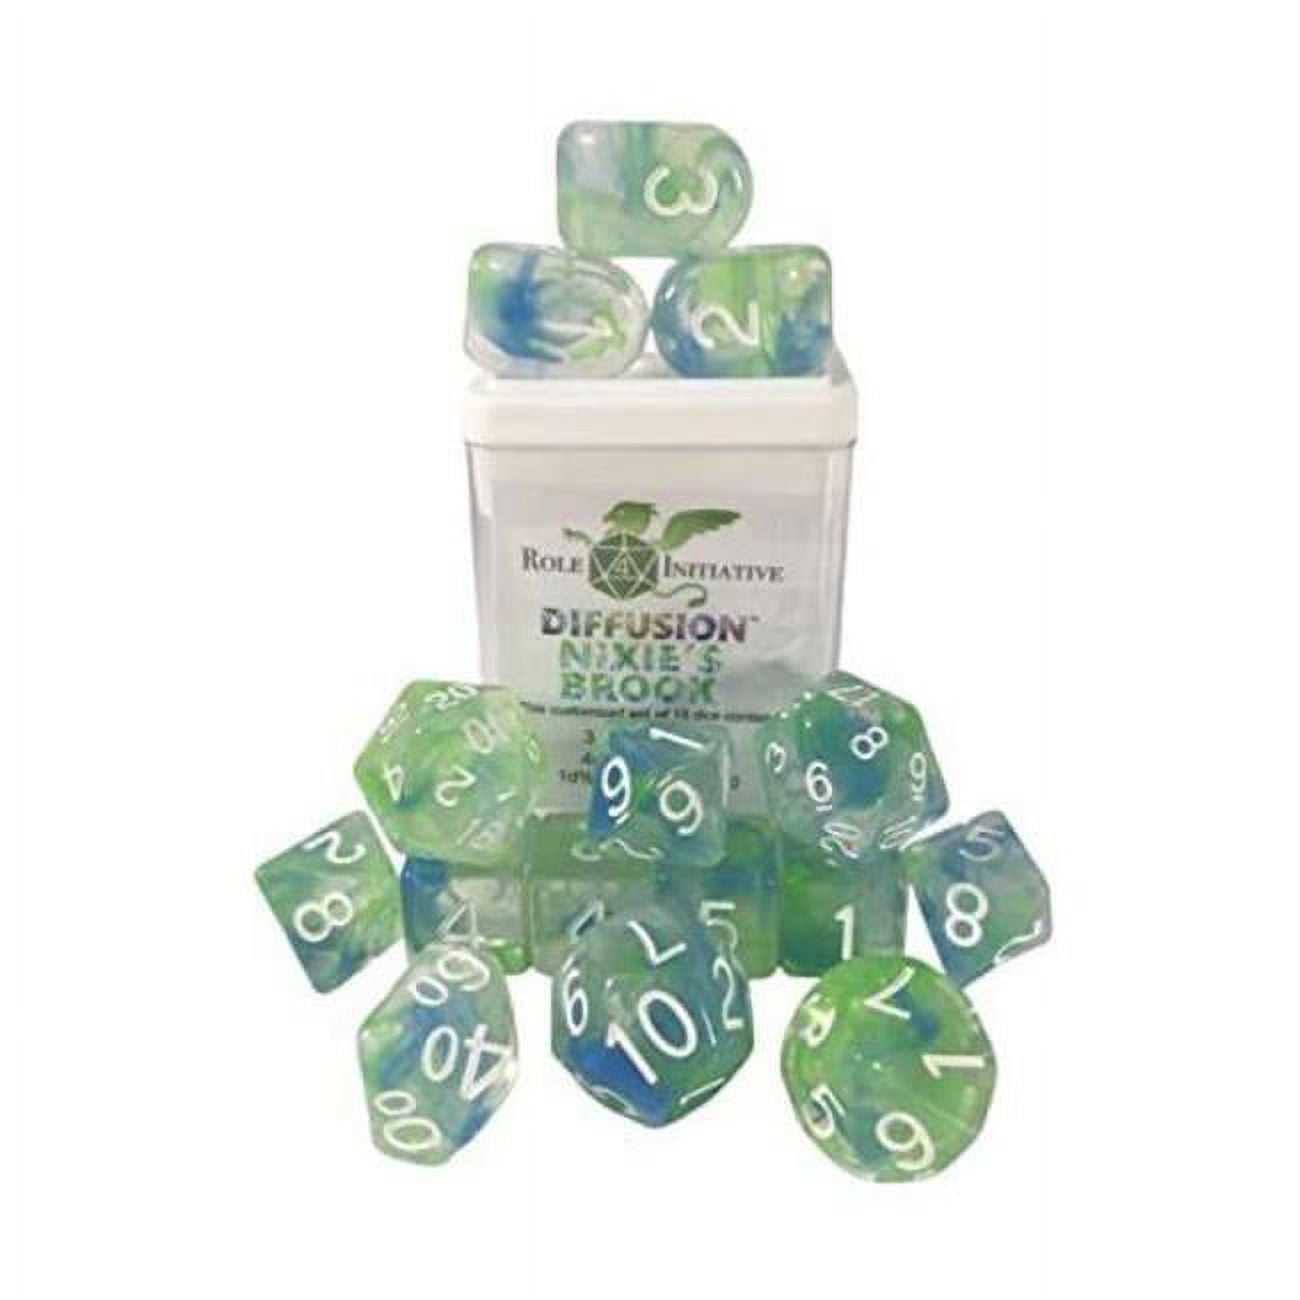 Picture of Role 4 Initiative R4I50533-FC-S Diffusion Nixies Brook SPR Dice, Set of 15